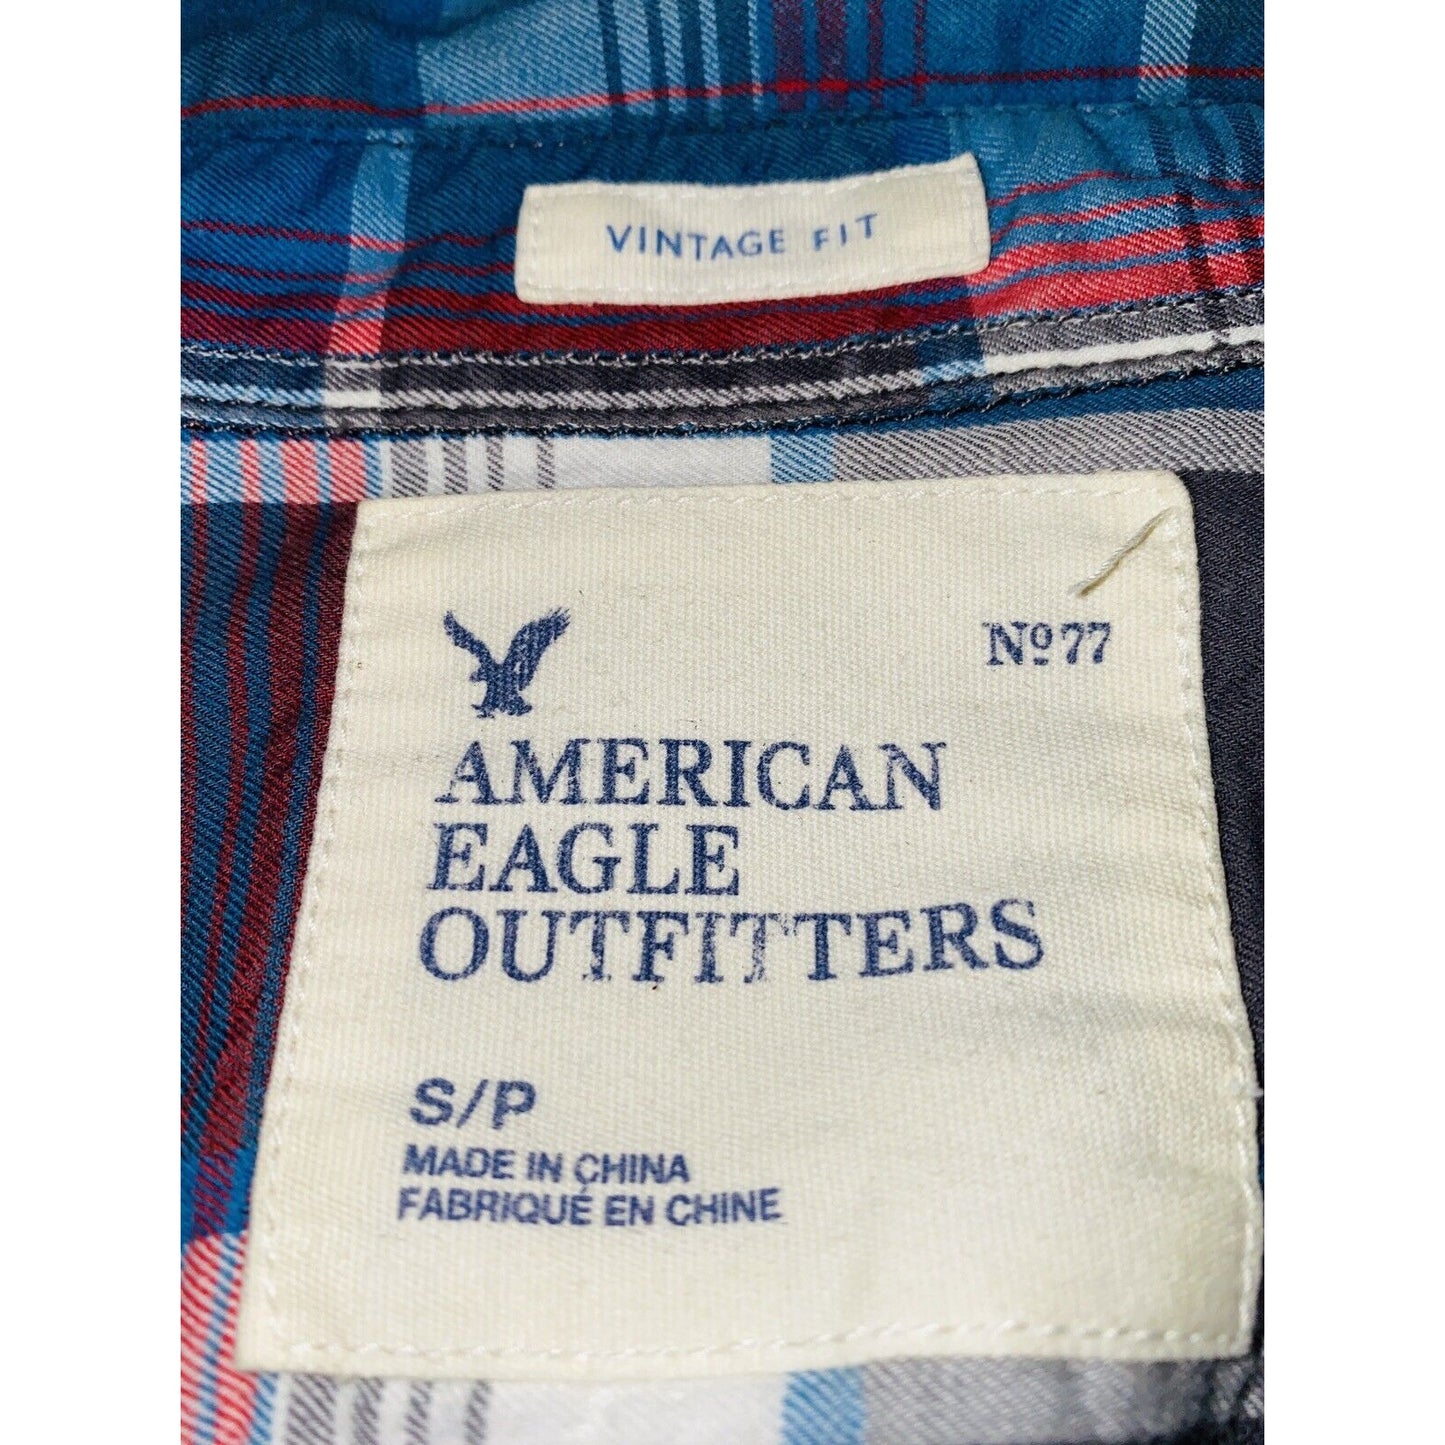 American Eagle Outfitters Blue Plaid Button-down Long Sleeve Sz S/P